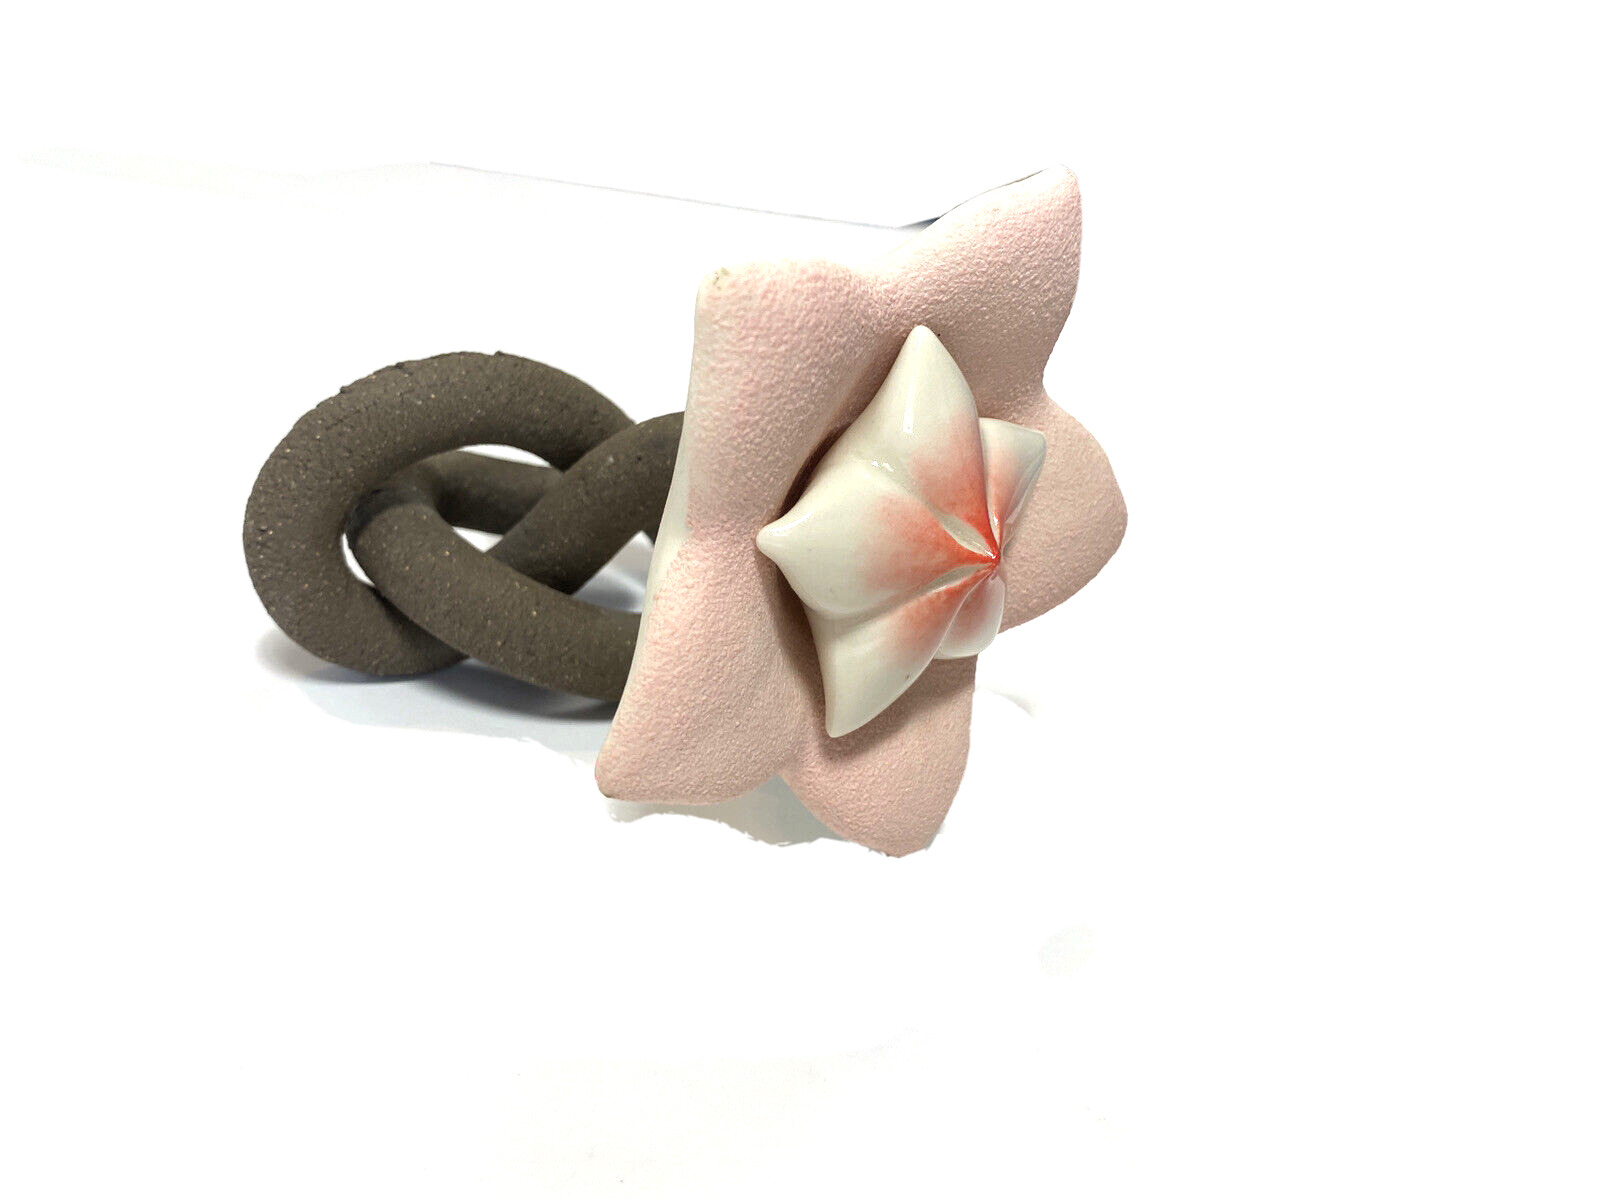 Vintage Rare Clay Flower Knot Paperweight Table Accent Piece Sculpture Decor